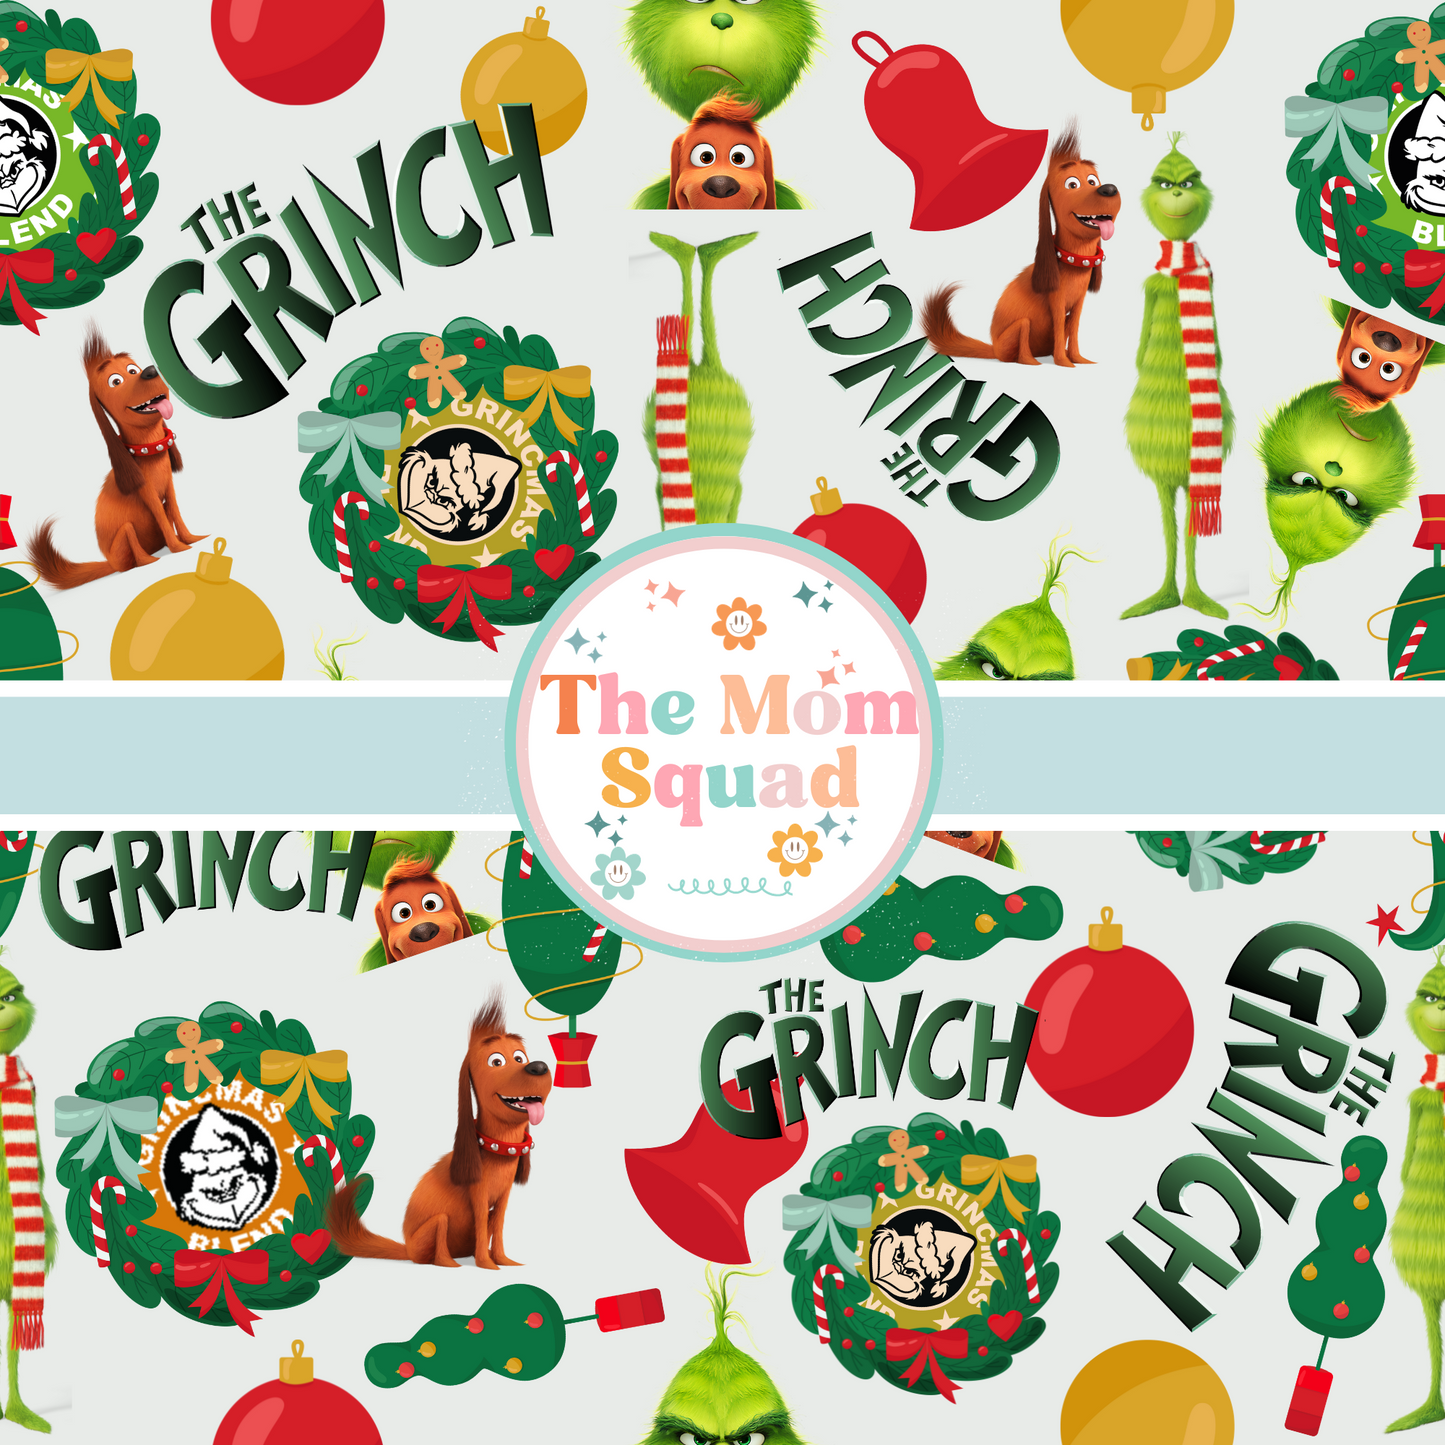 Get Festive with Our Grinch Christmas Seamless Printable Pattern - Perfect for Holiday Crafts!